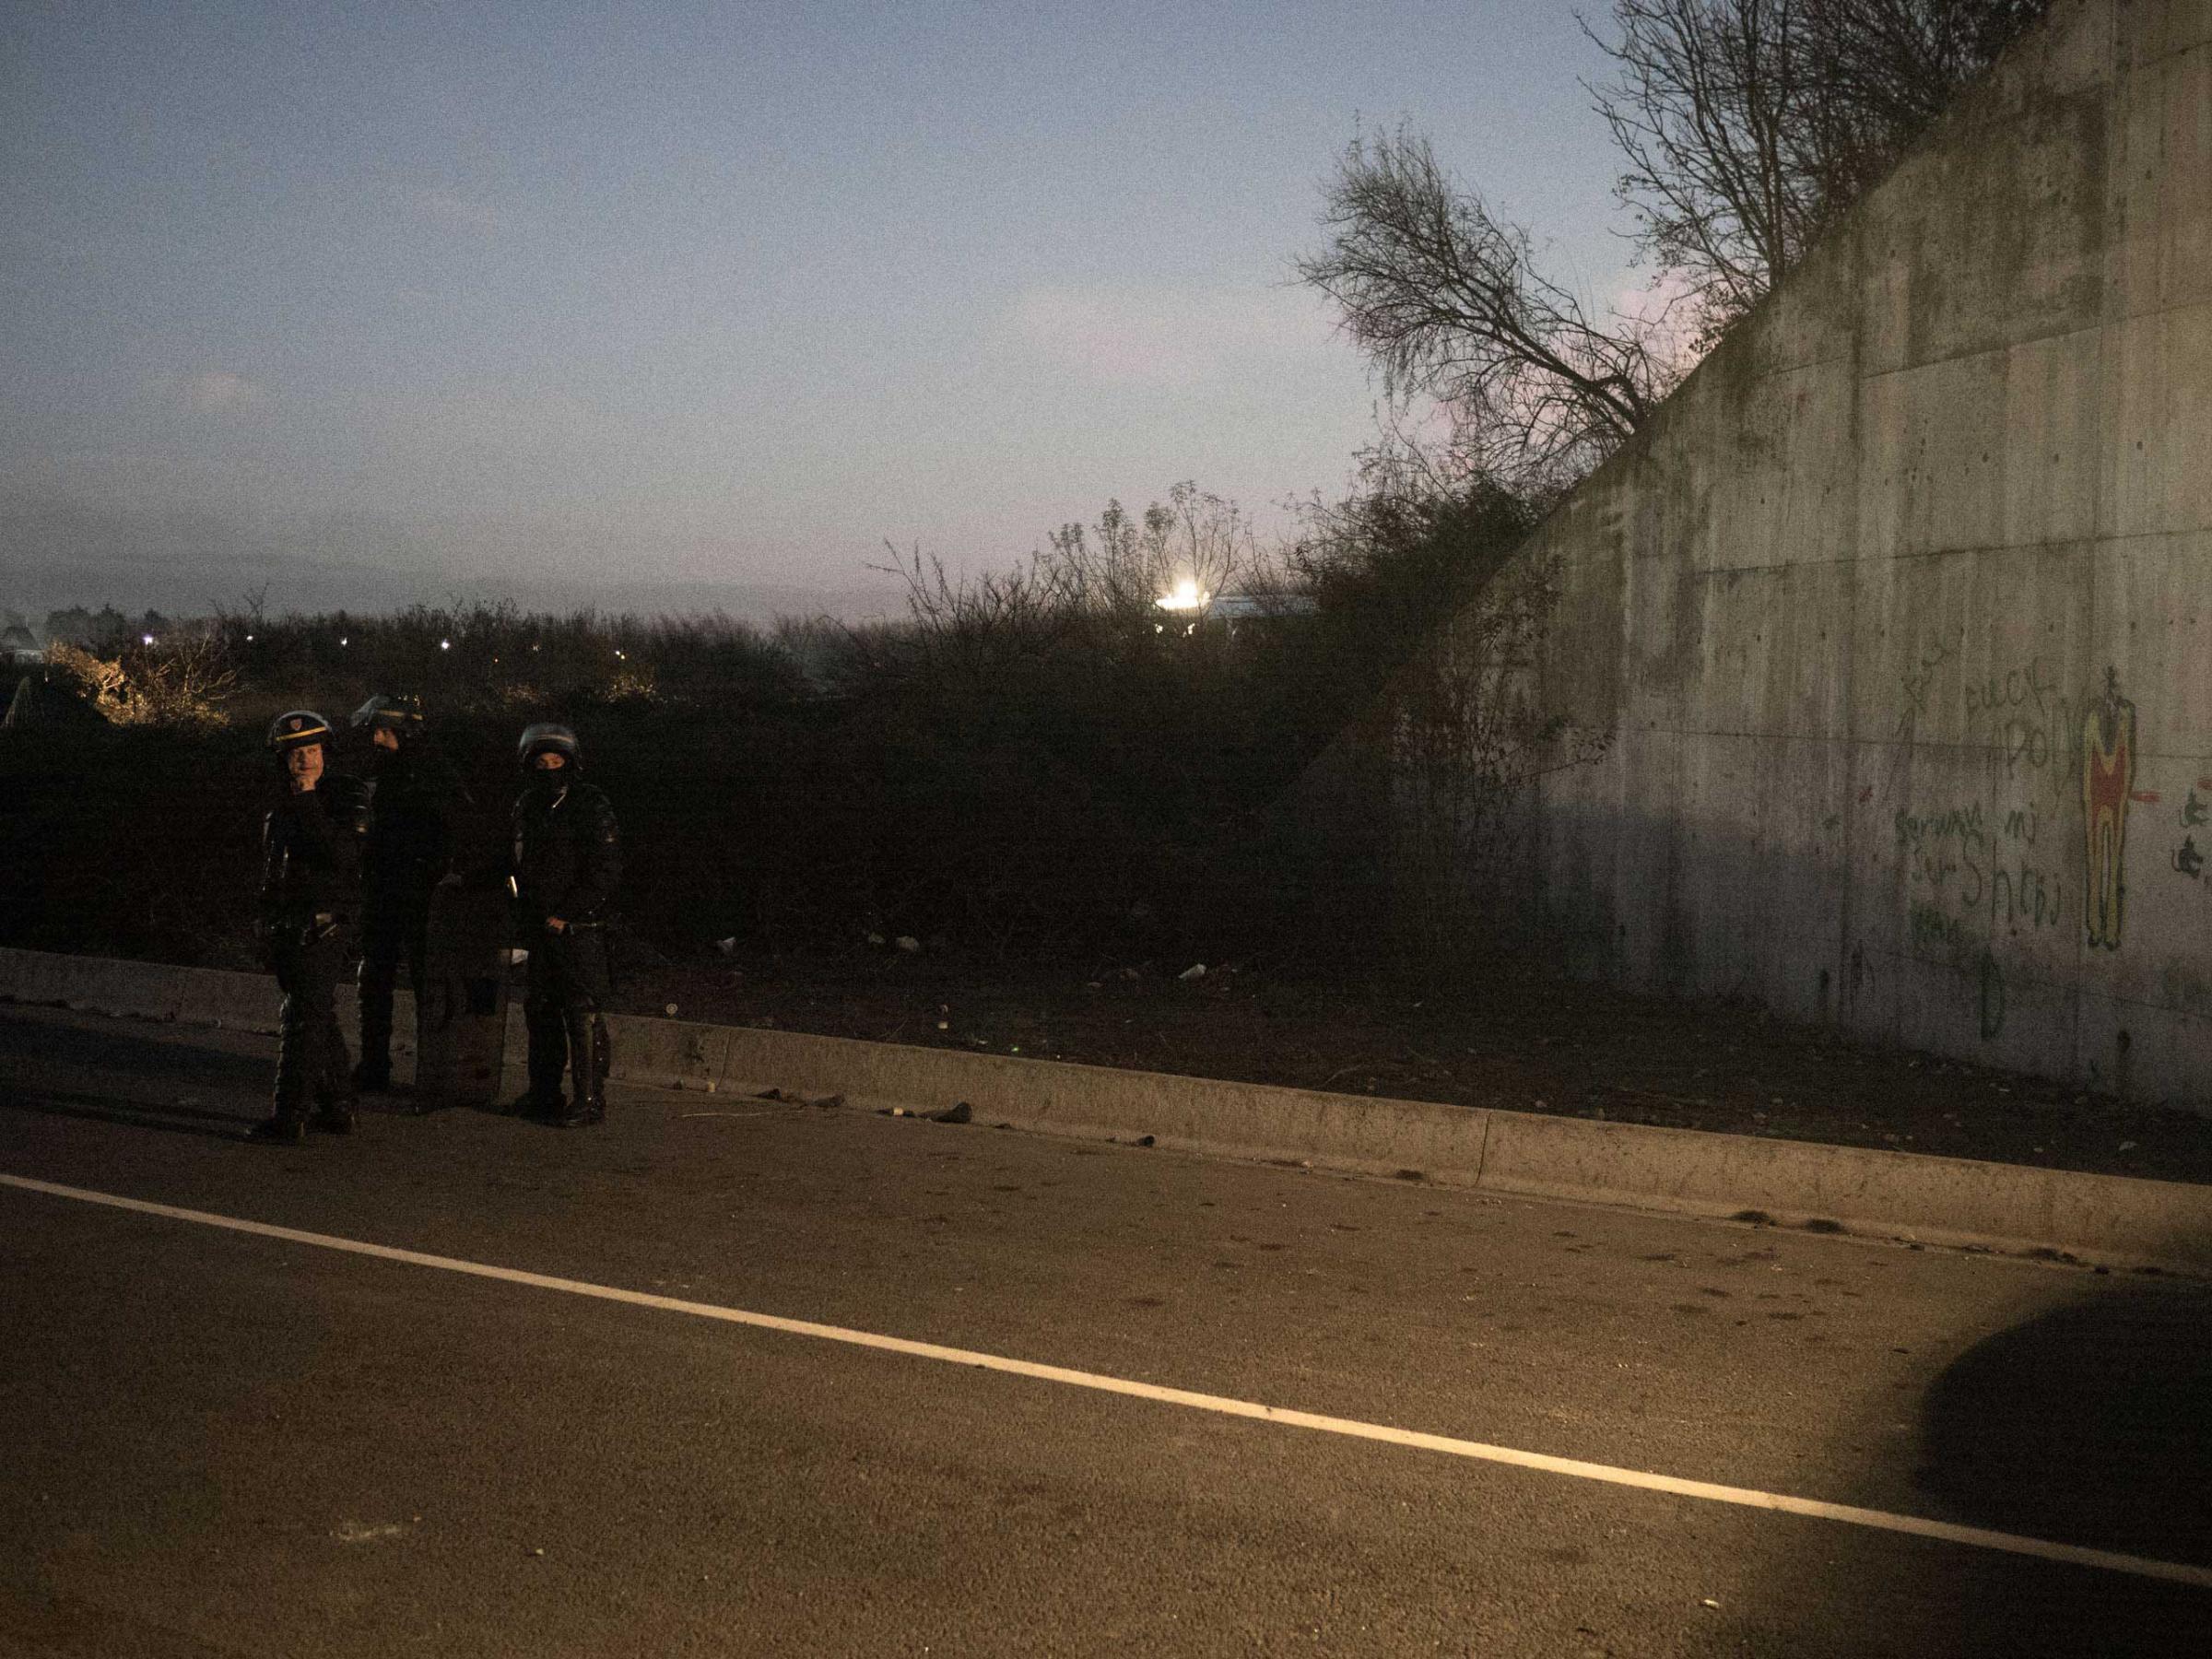 Anti-riot police (CRS) during a tense face-off with a group of migrants. As it has become harder for migrants to cross to the United Kingdom, confrontations with police have become more frequent, Nov. 25, 2015, Calais, France.